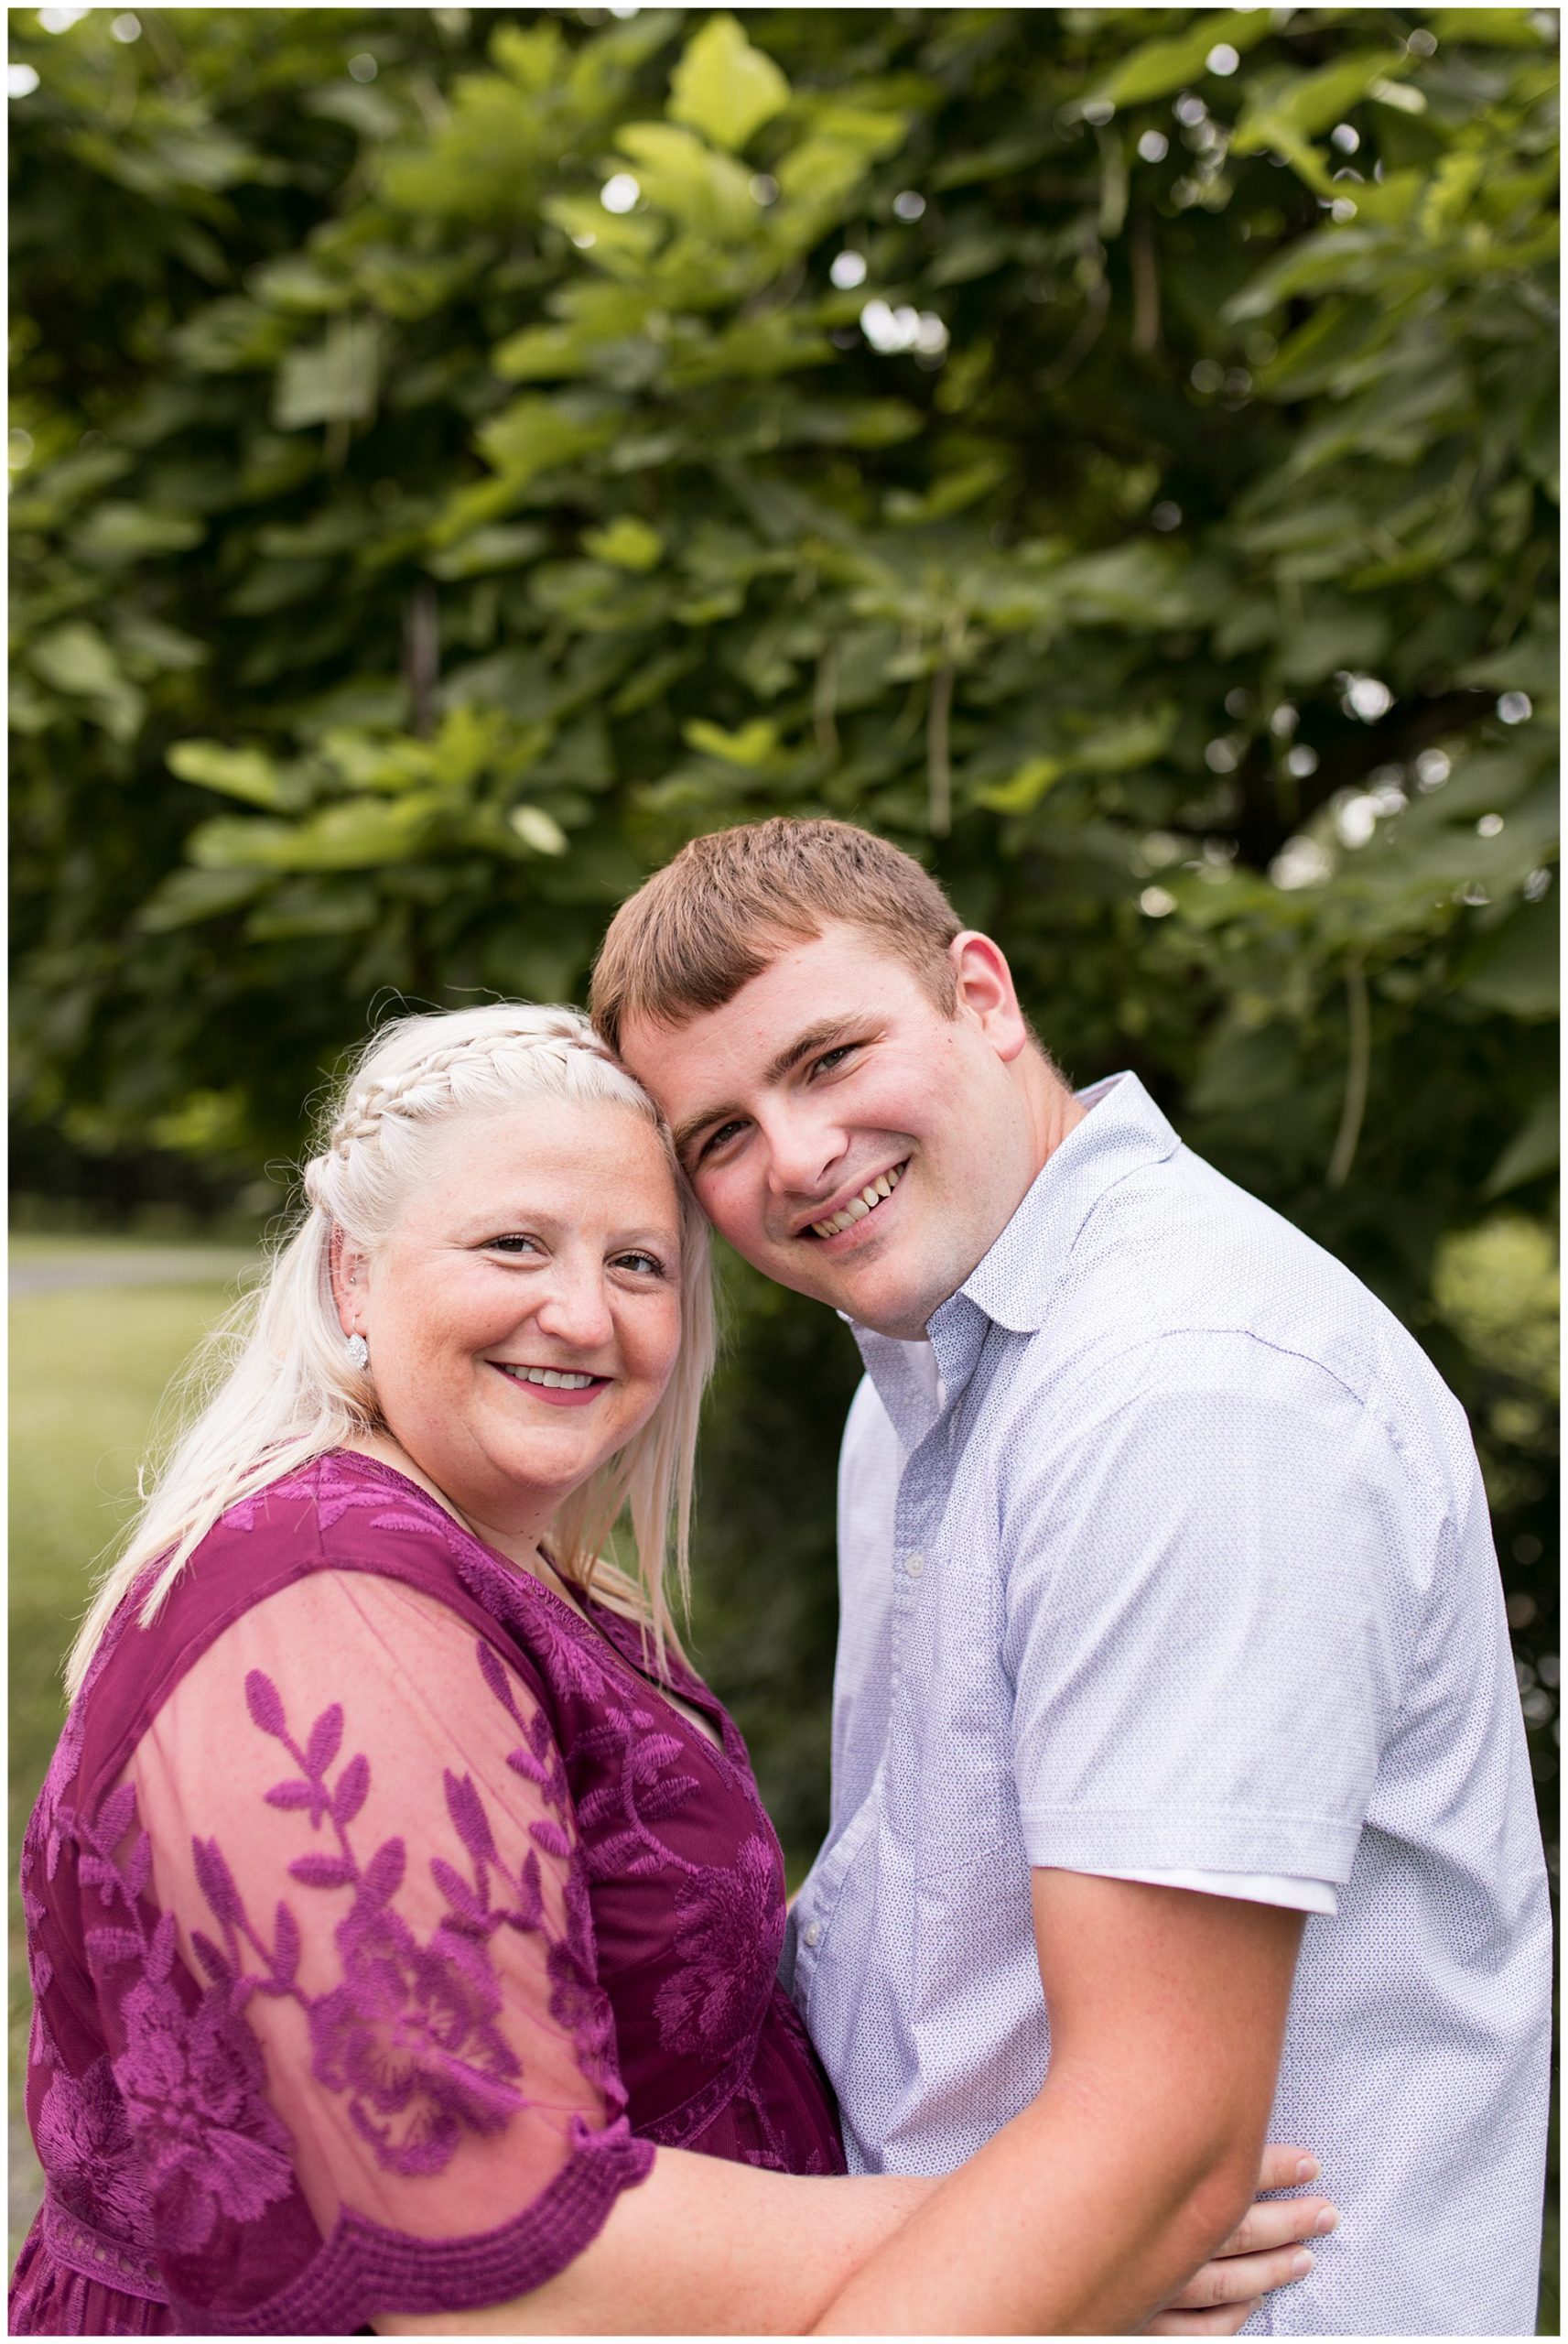 Morrow's Meadow maternity session in Muncie Indiana